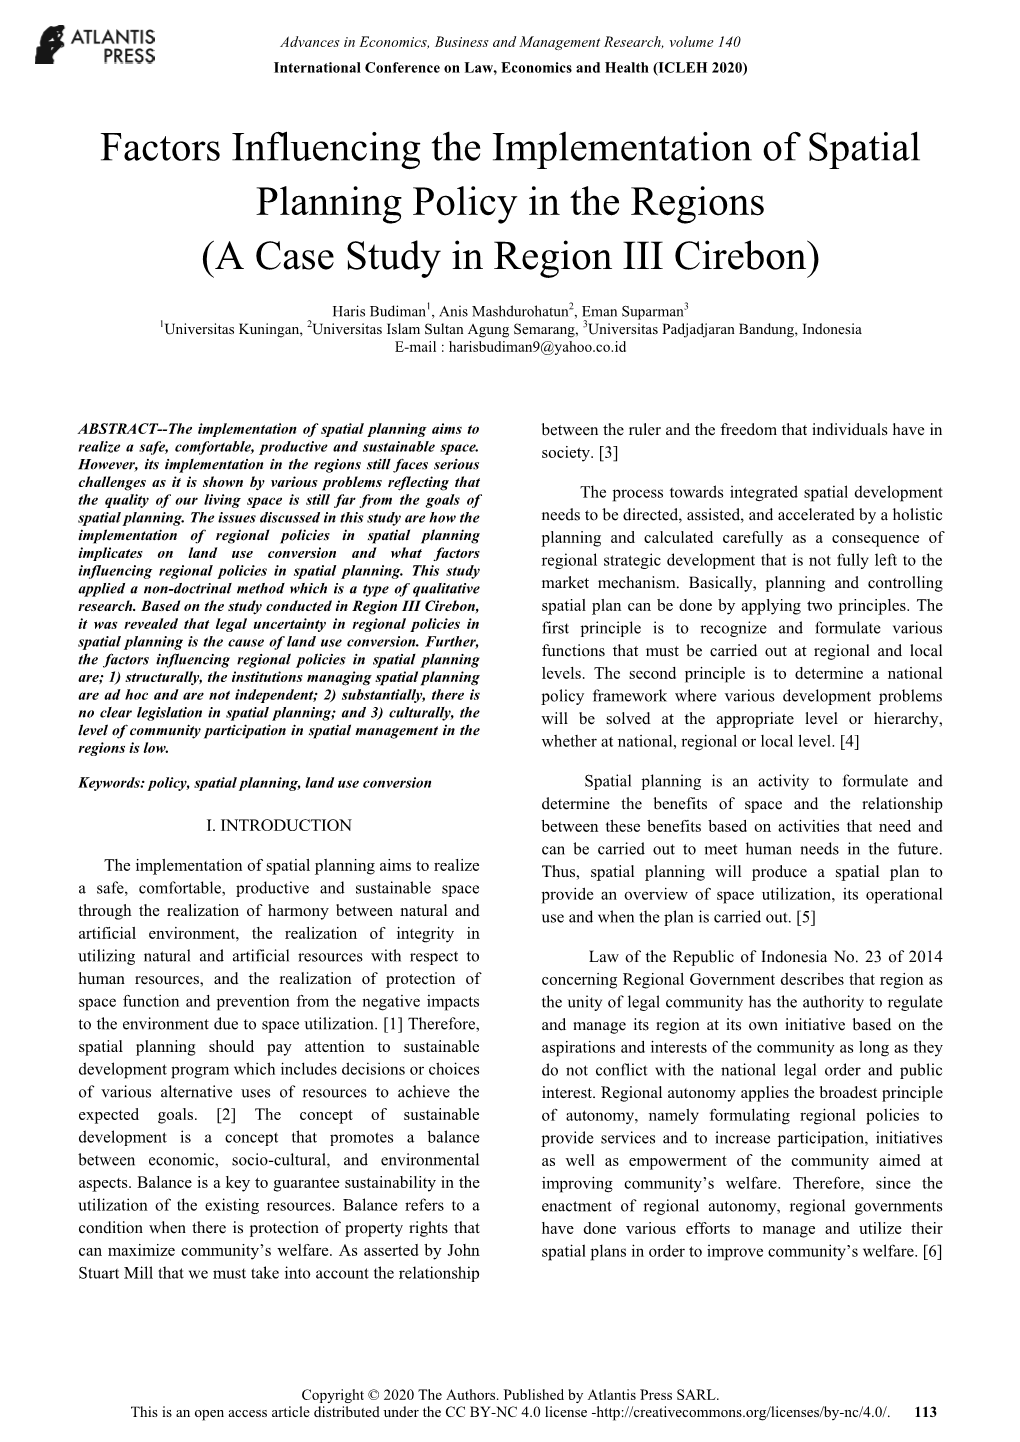 Factors Influencing the Implementation of Spatial Planning Policy in the Regions (A Case Study in Region III Cirebon)